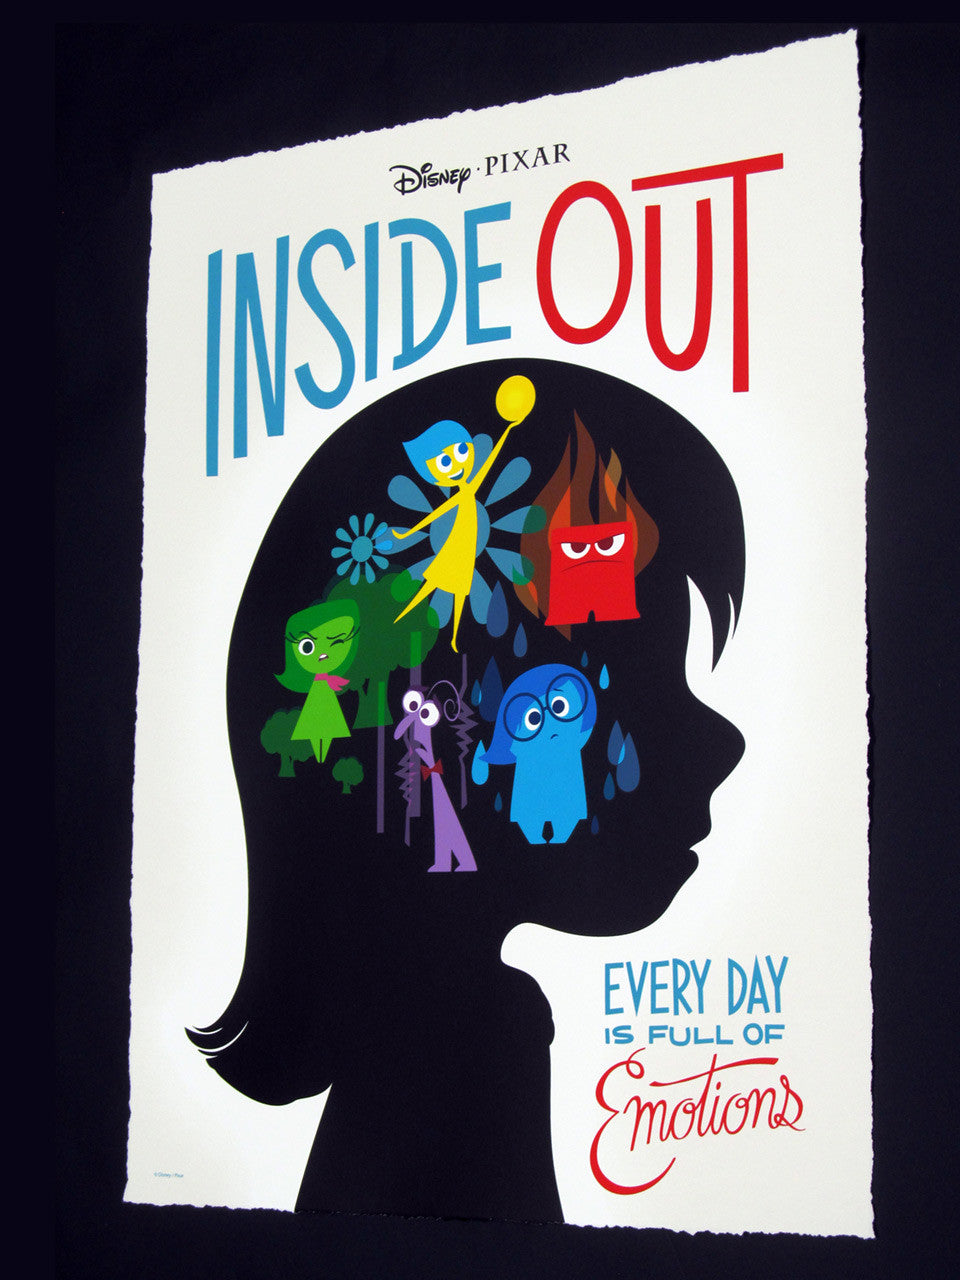 Cyclops Print Works Print #01: Inside Out by Stacey Aoyama